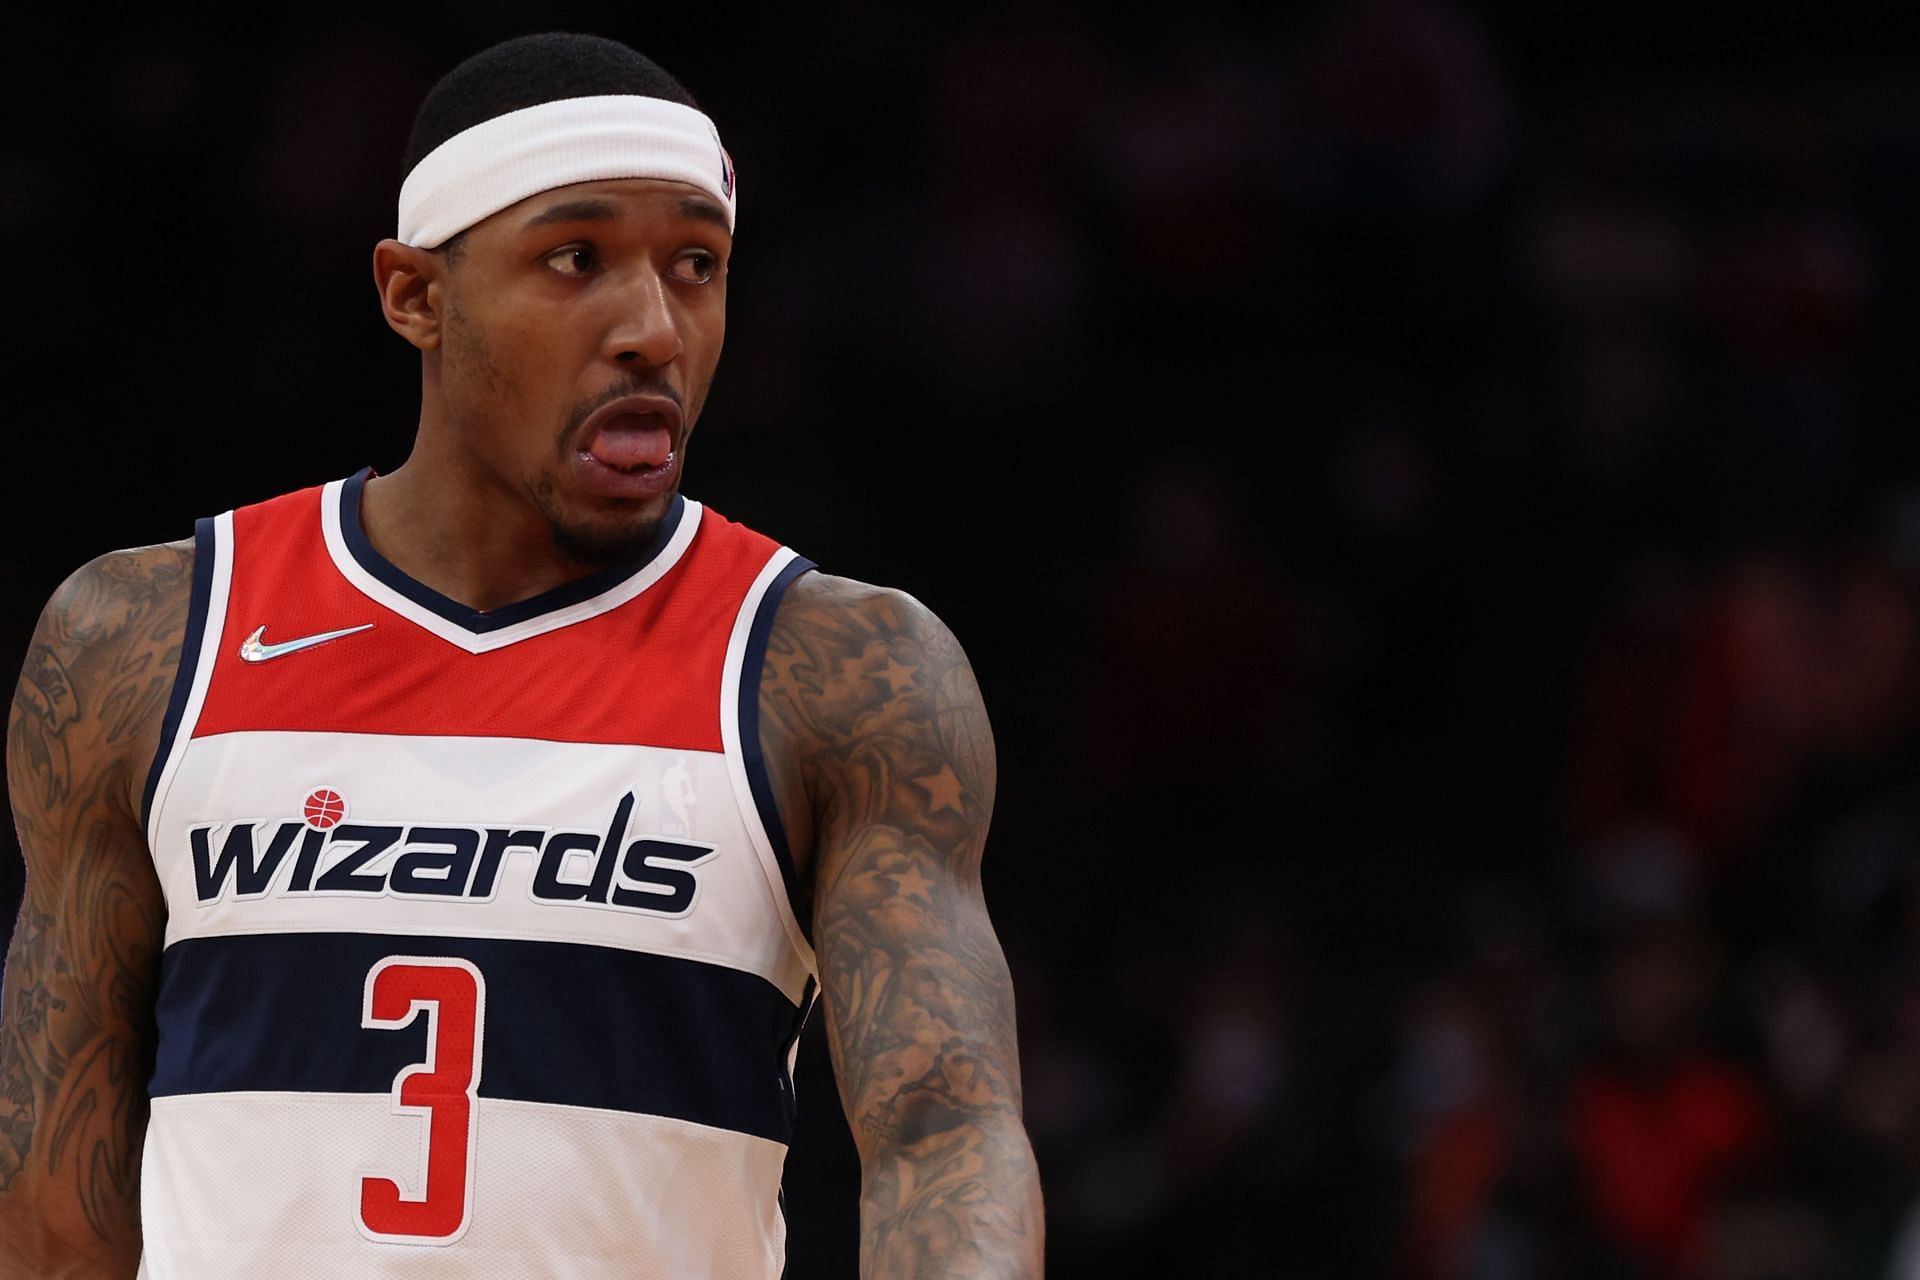 Washington Wizardsre-signed Bradley Beal by offering him a five year $251 million extension